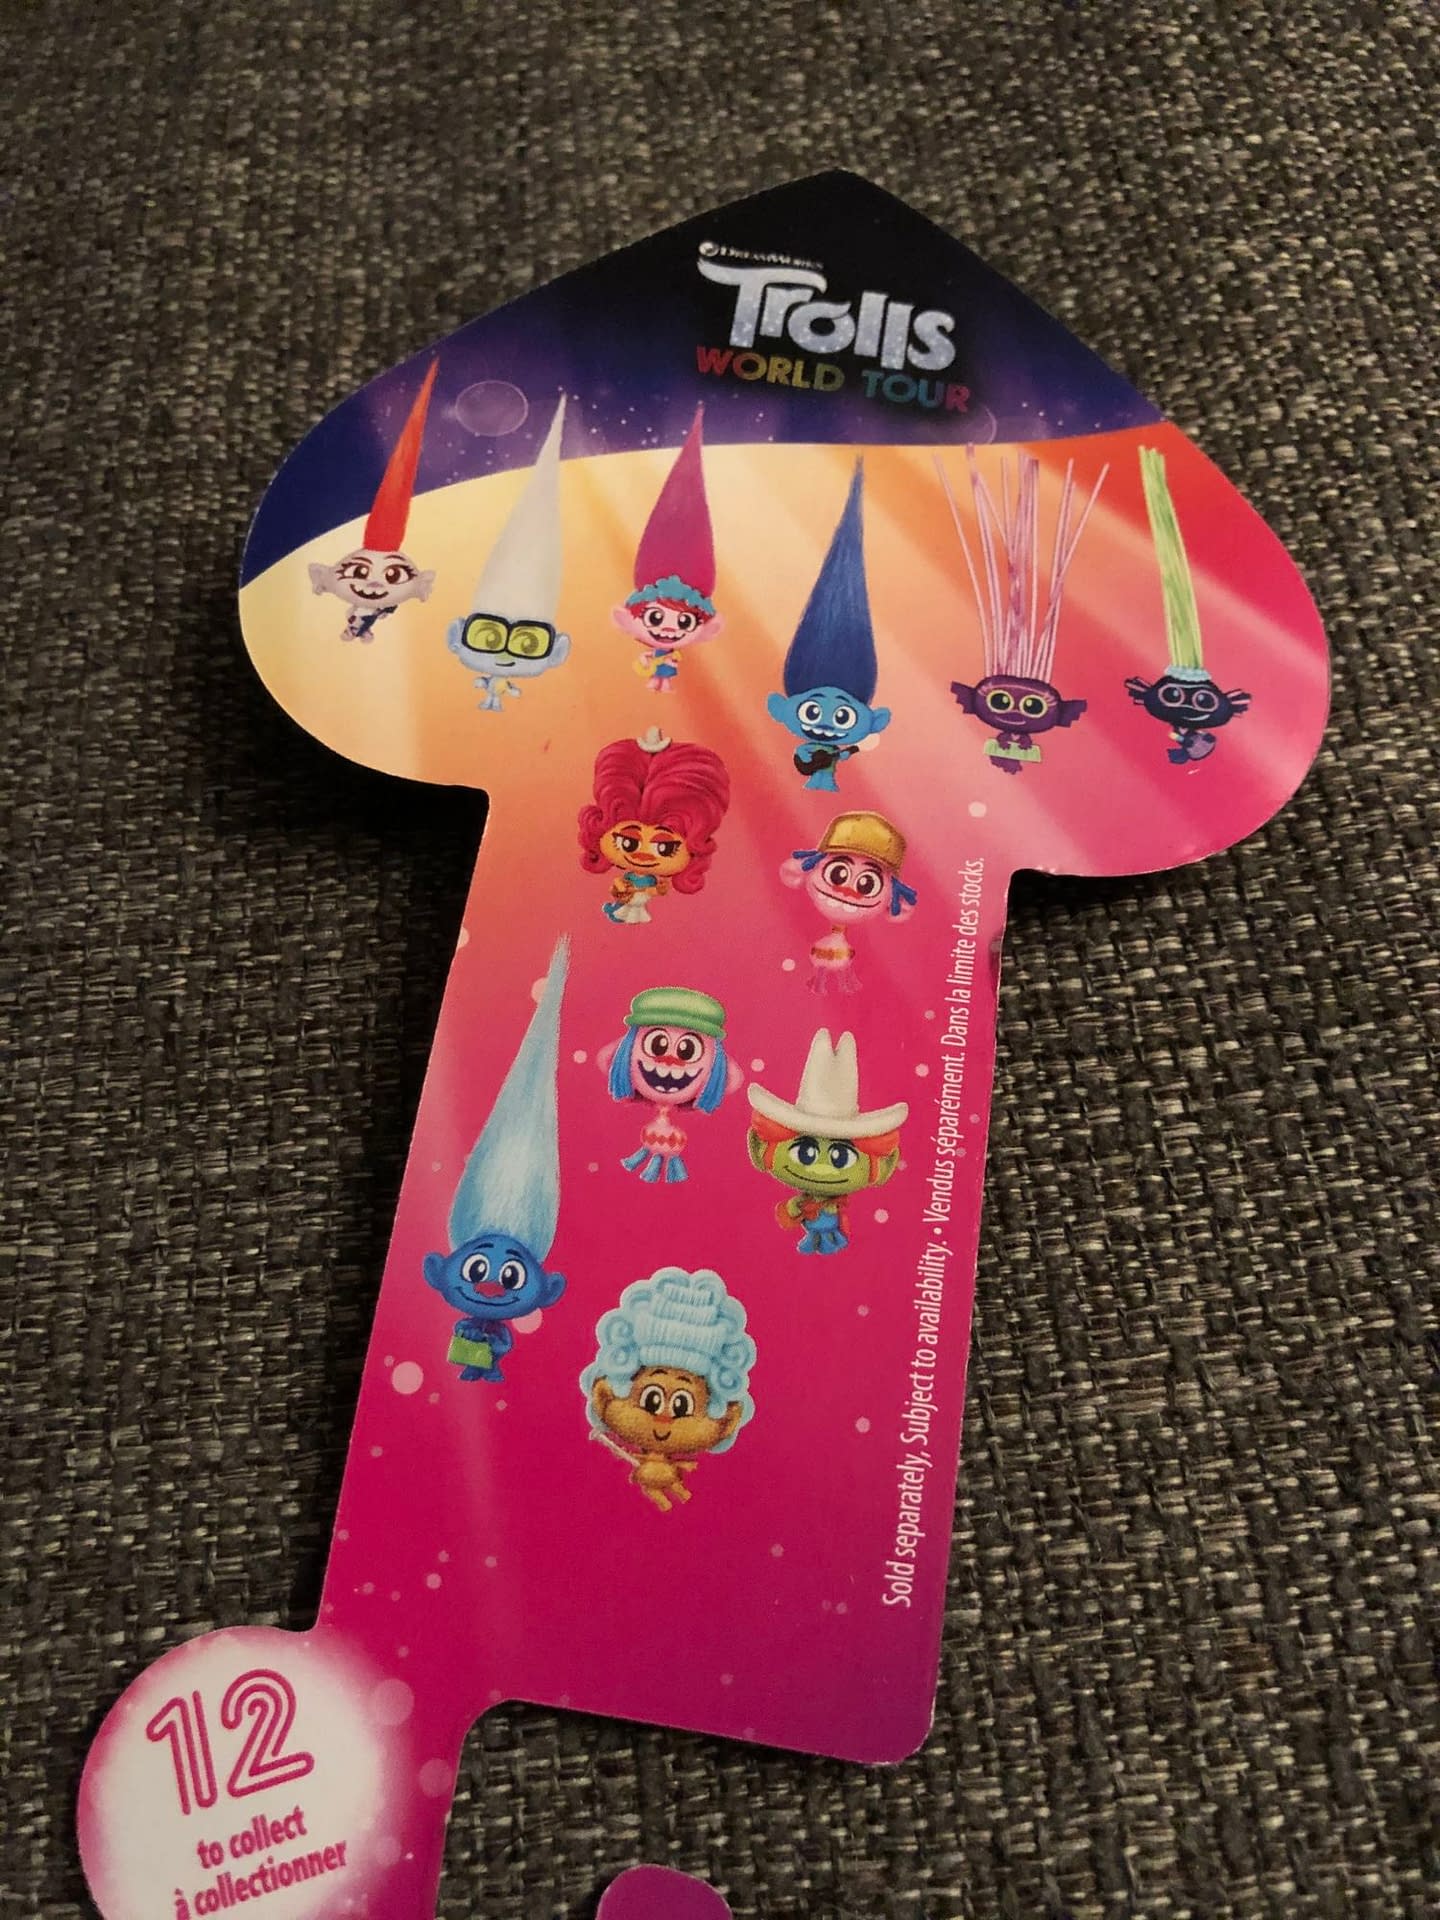 "Trolls: World Tour" Is Here to Rock Out Thanks to Hasbro [Review]